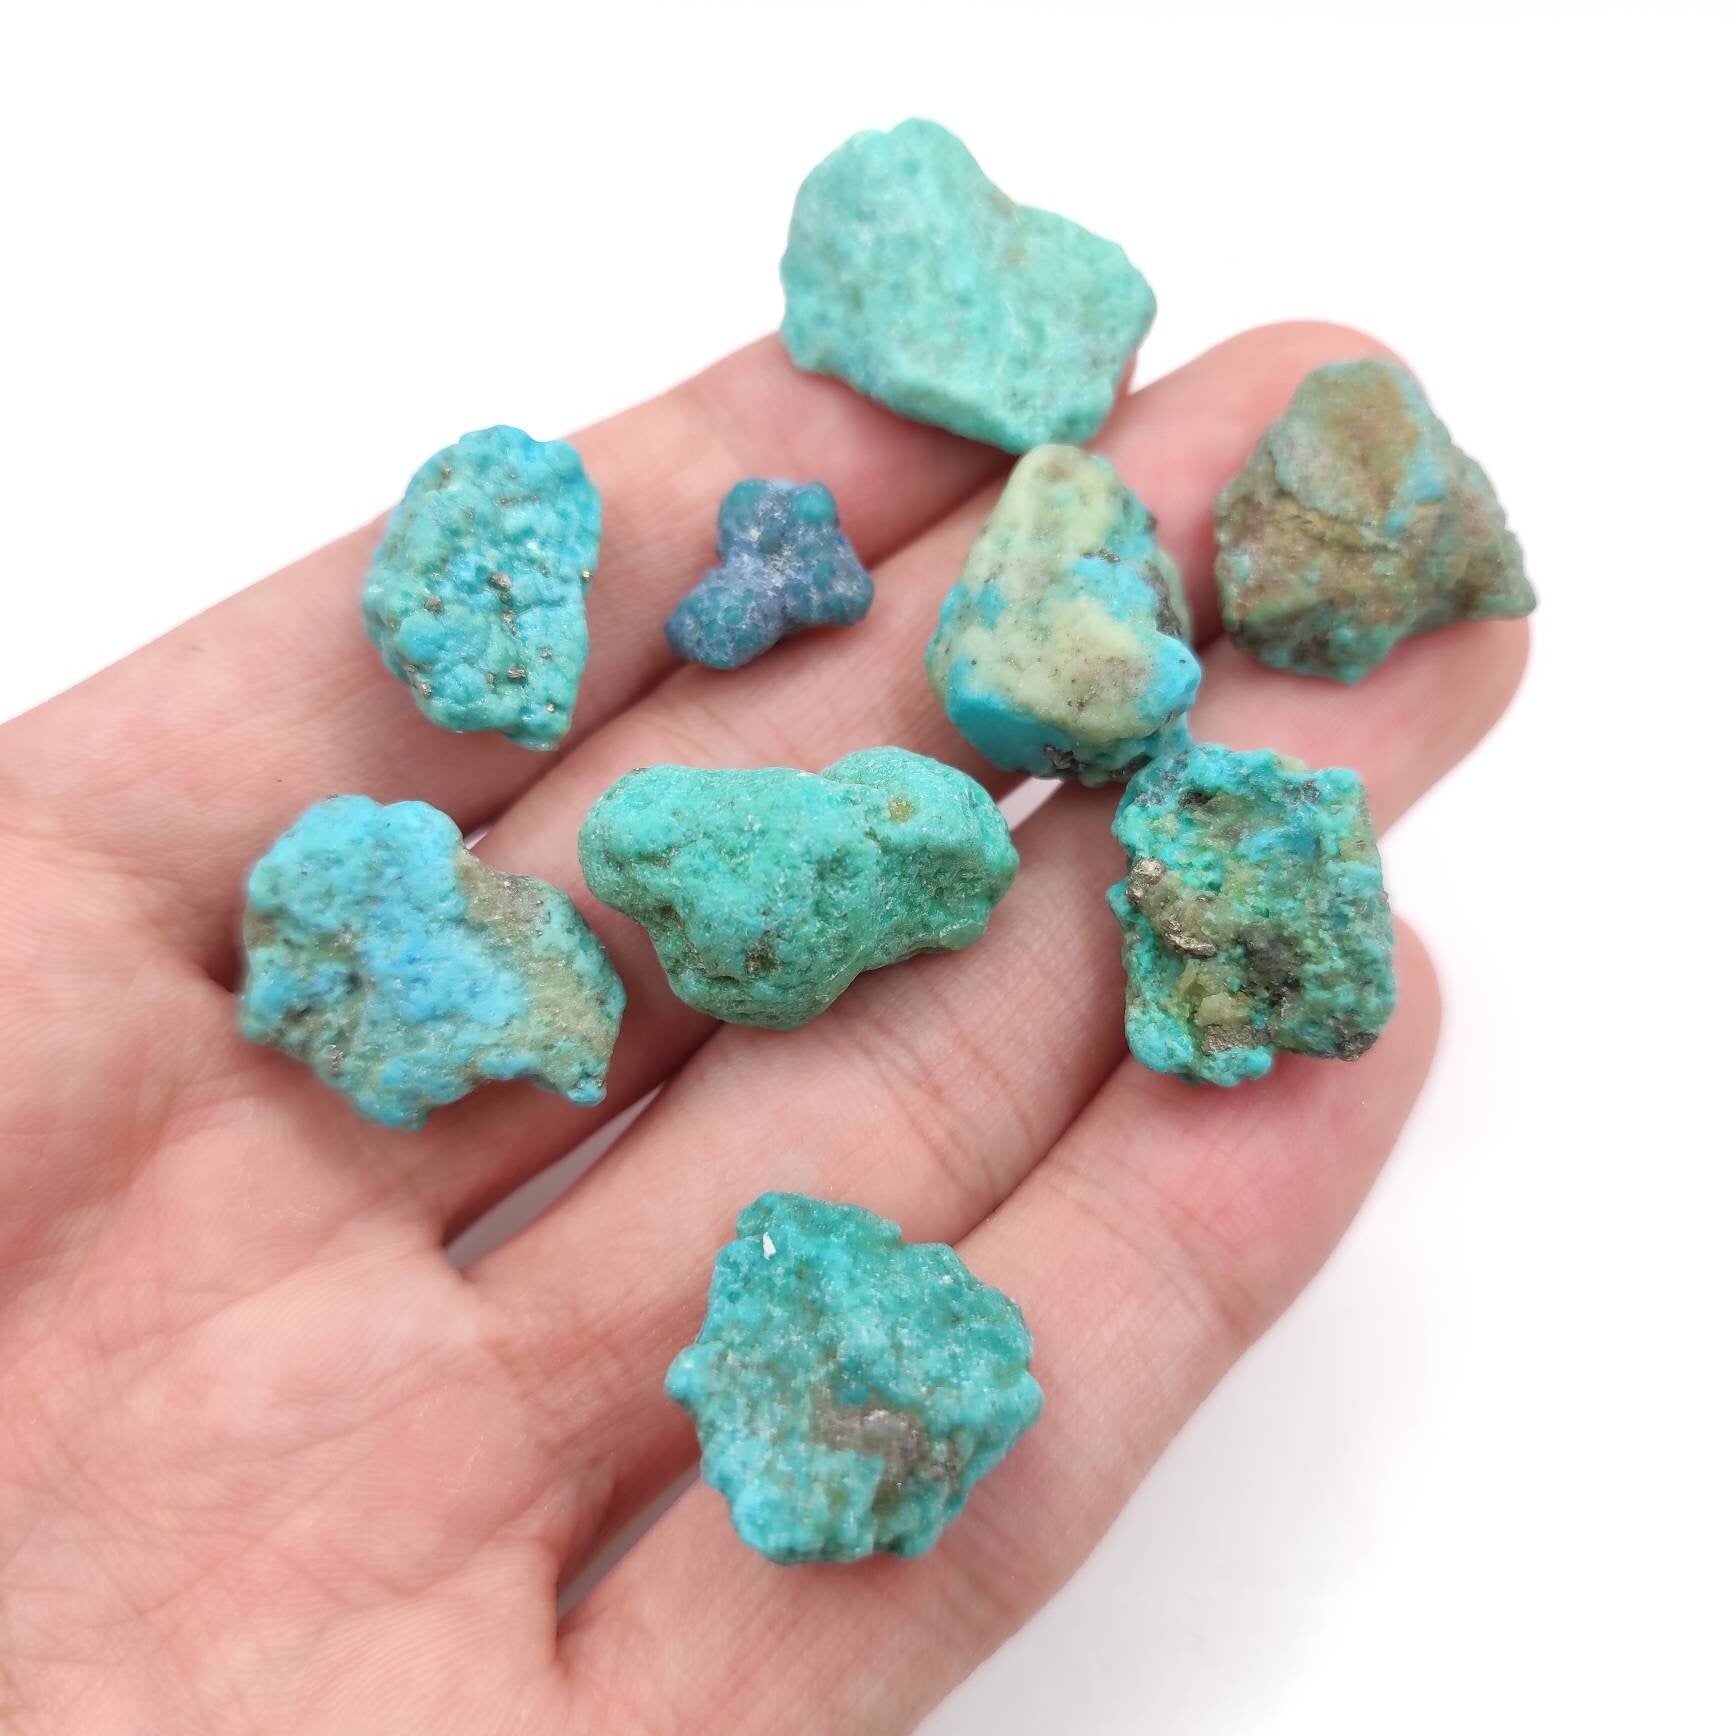 25.55g 9pcs Campitos Turquoise Lot Stabilized Turquoise Nuggets Sonora Mexico Blue Turquoise Genuine Turquoise with Pyrite Rough Turquoise